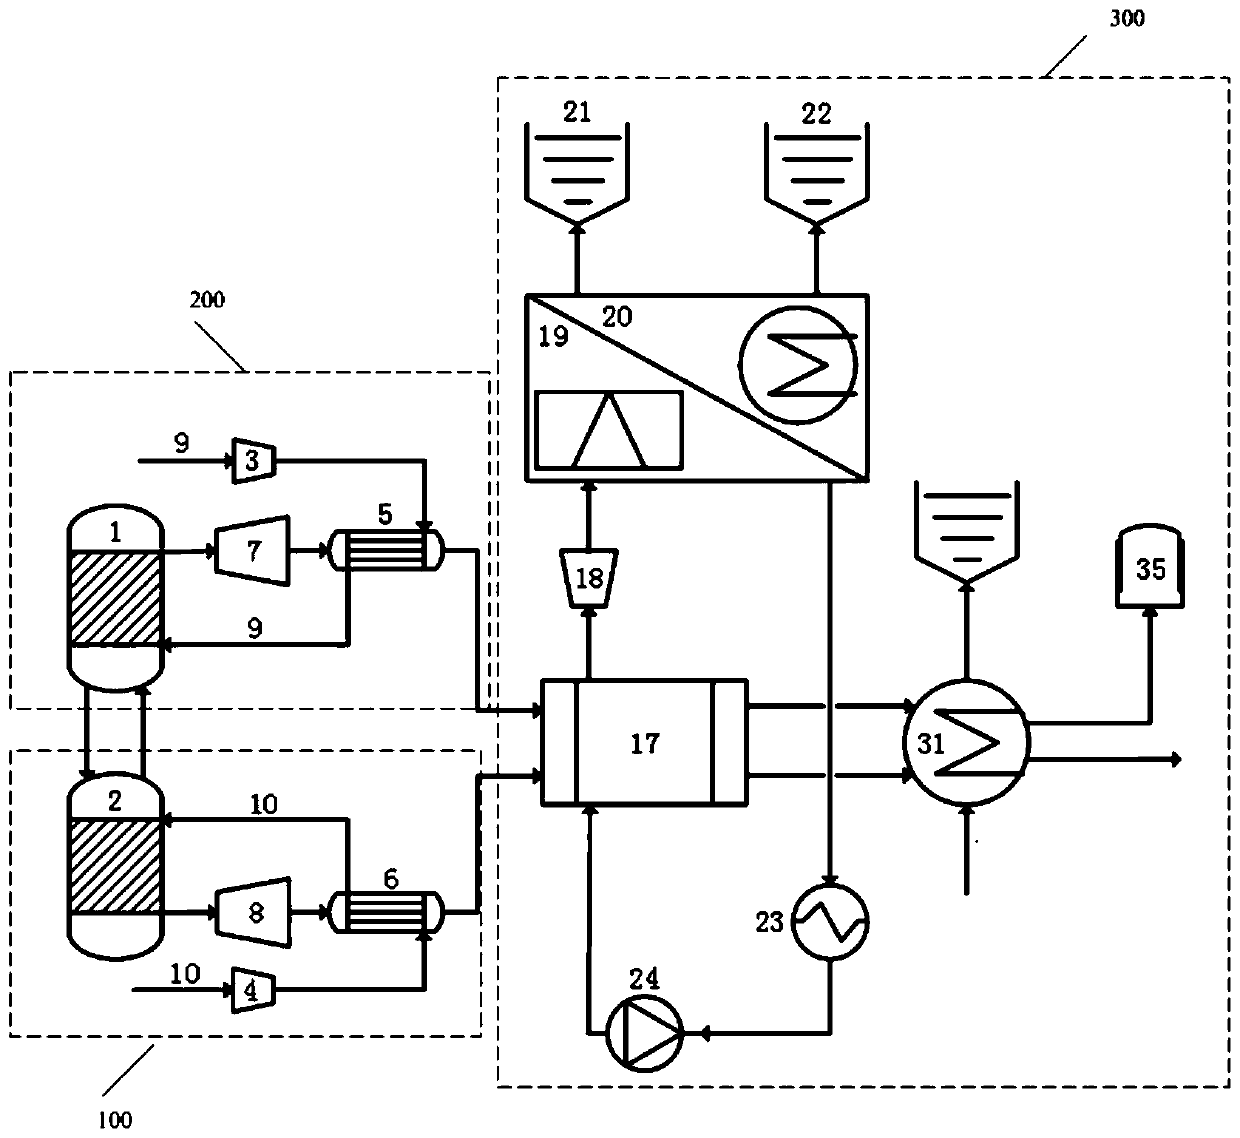 Distributed energy system based on chemical looping combustion